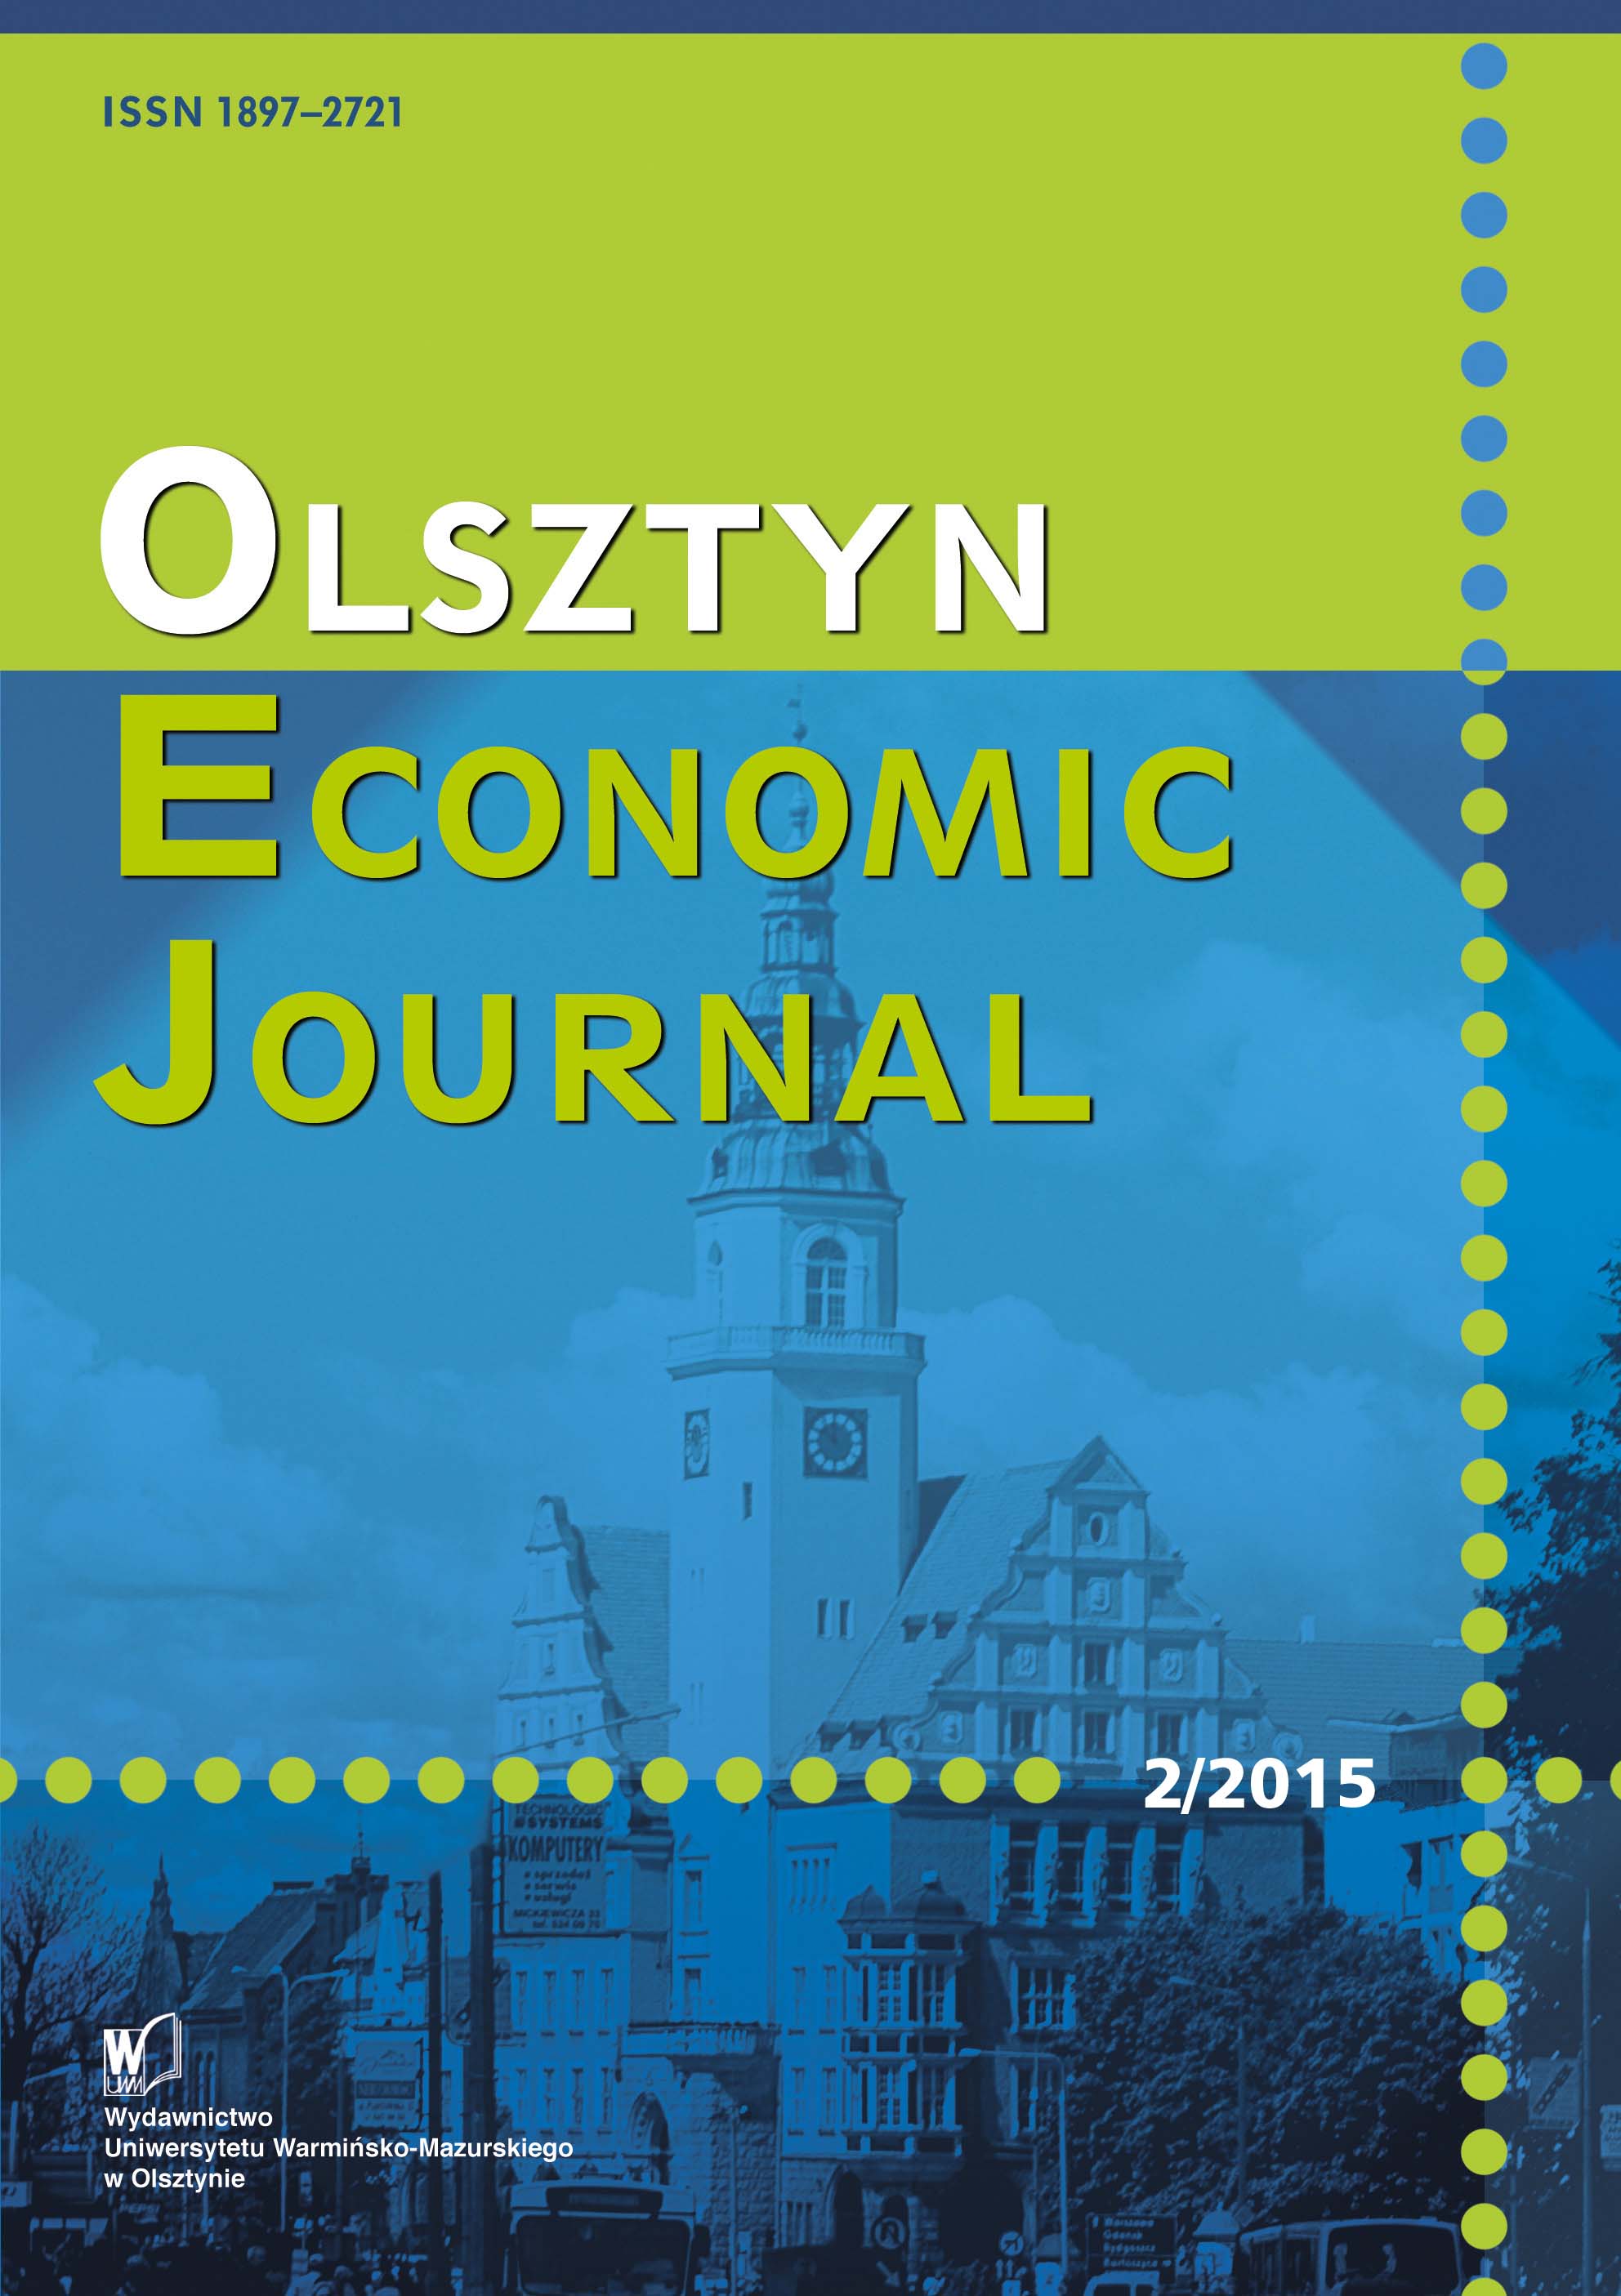 Spatial Diversification of the Unemployment Rate
by Province and District in Poland between 2008 and 2013 Cover Image